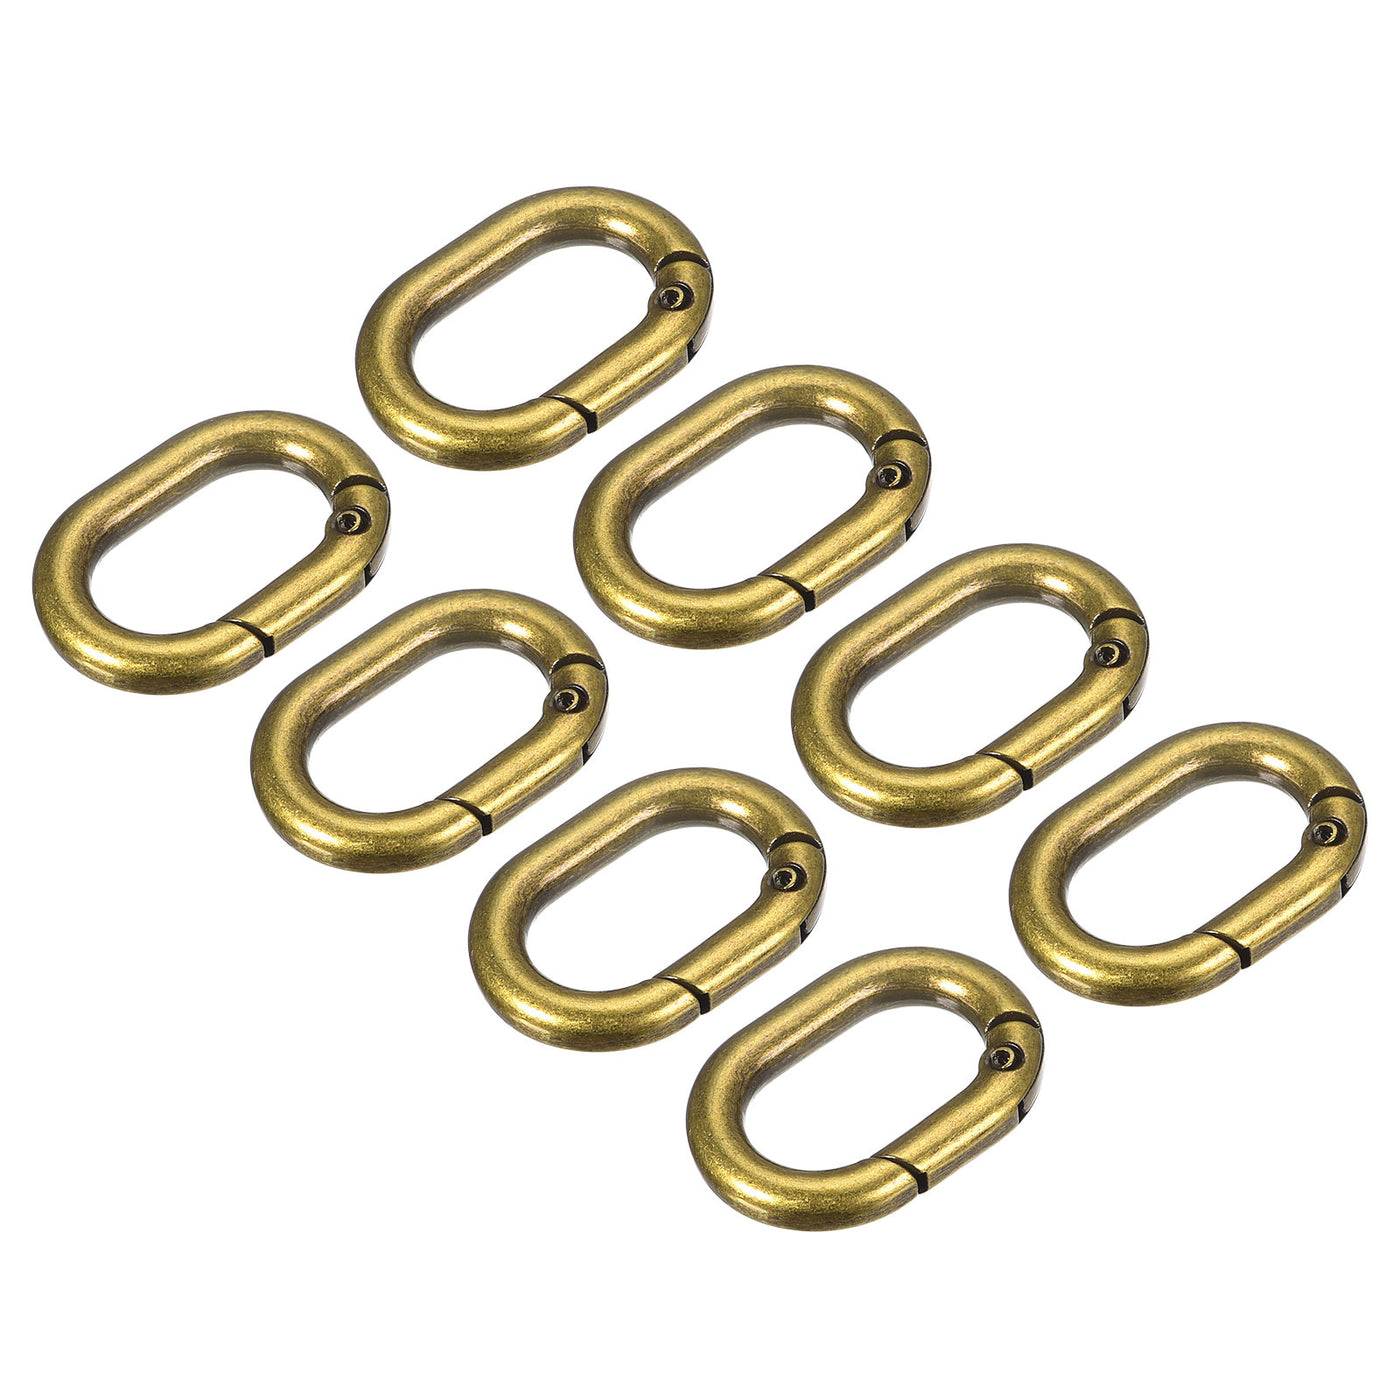 uxcell Uxcell 1.14" Spring Oval Ring Snap Clip Trigger for Bag Purse Keychain, 8Pcs Brass